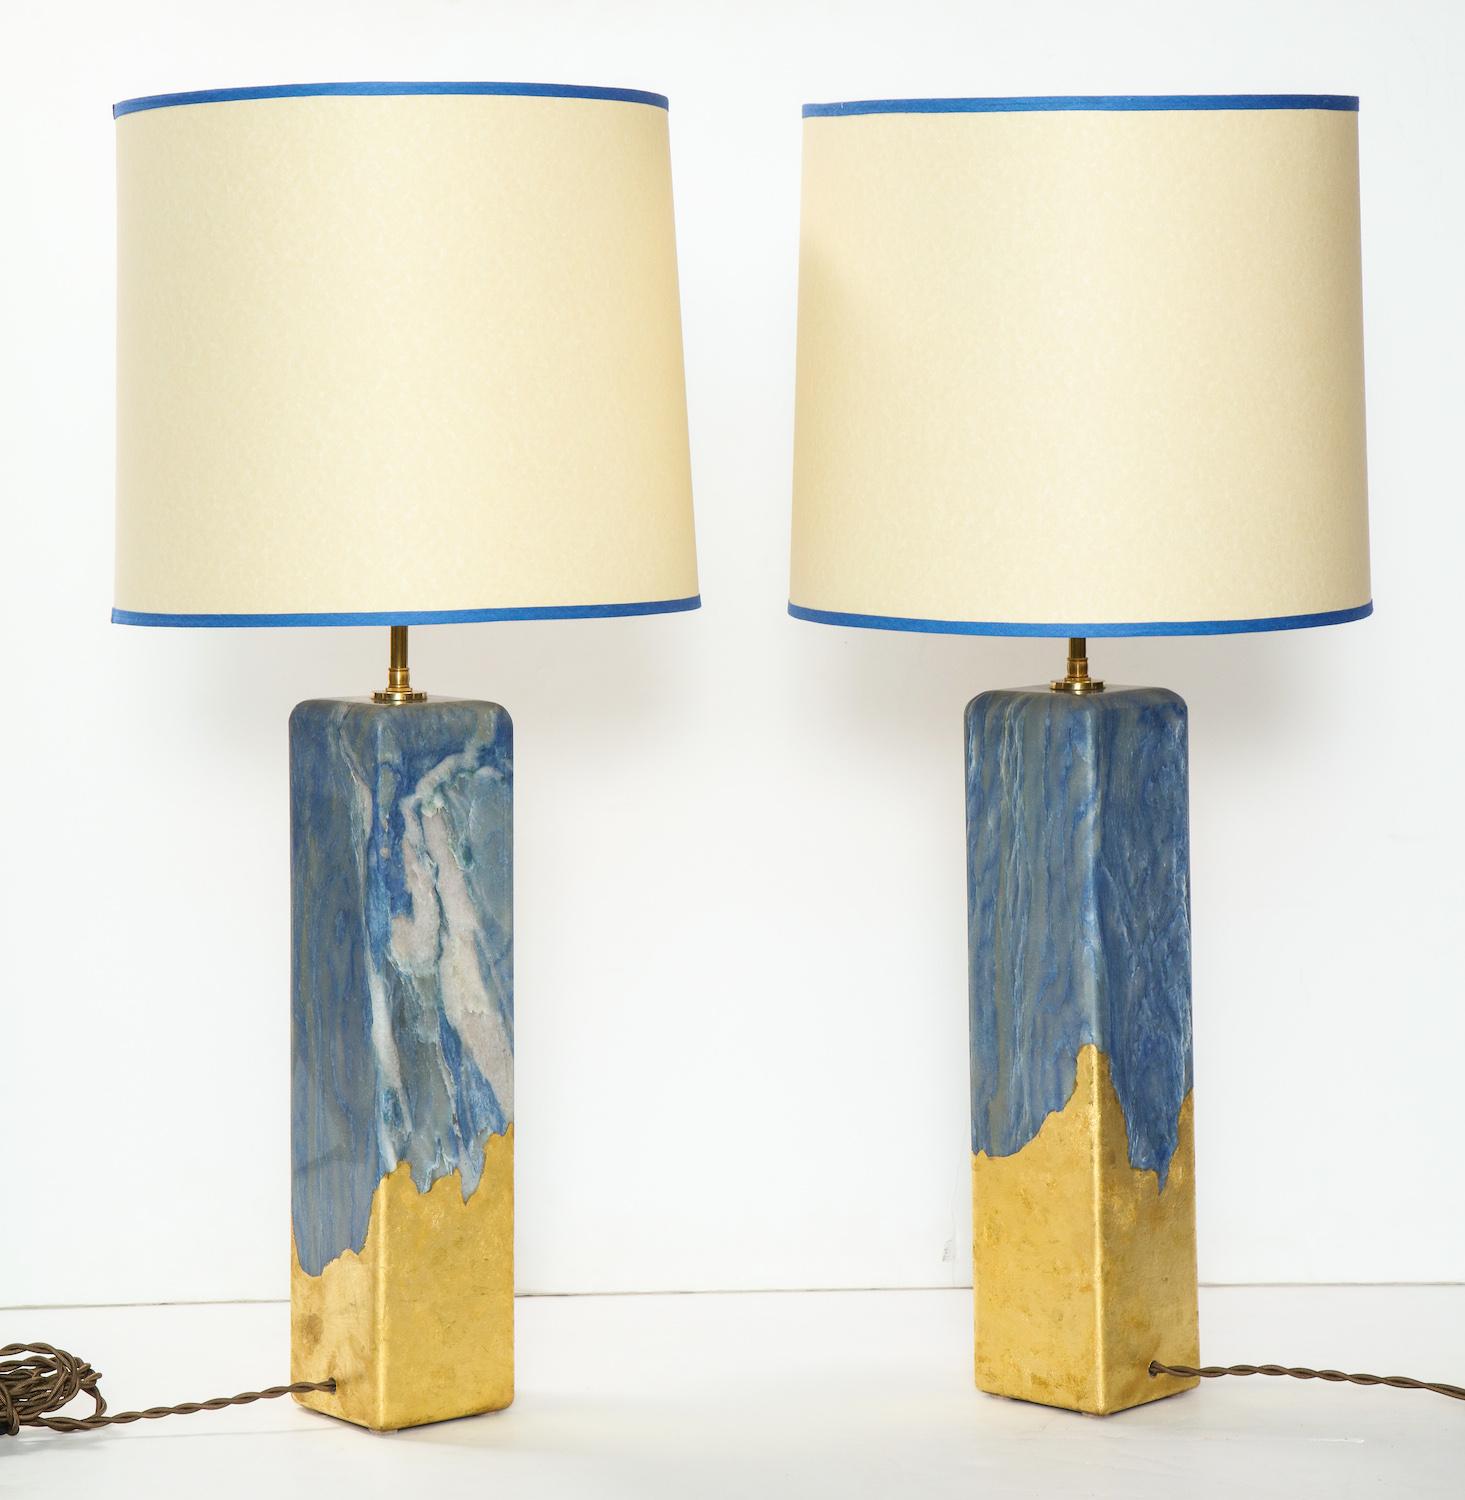 Solid stone lamps of Azul Macaubus with rounded corners and gold-leaf around the lower portion by Arriau. Each lamp has 2 standard sockets that swivel. These lamps are made per order in France and require 12-15 weeks lead time. Shade diameter is 18